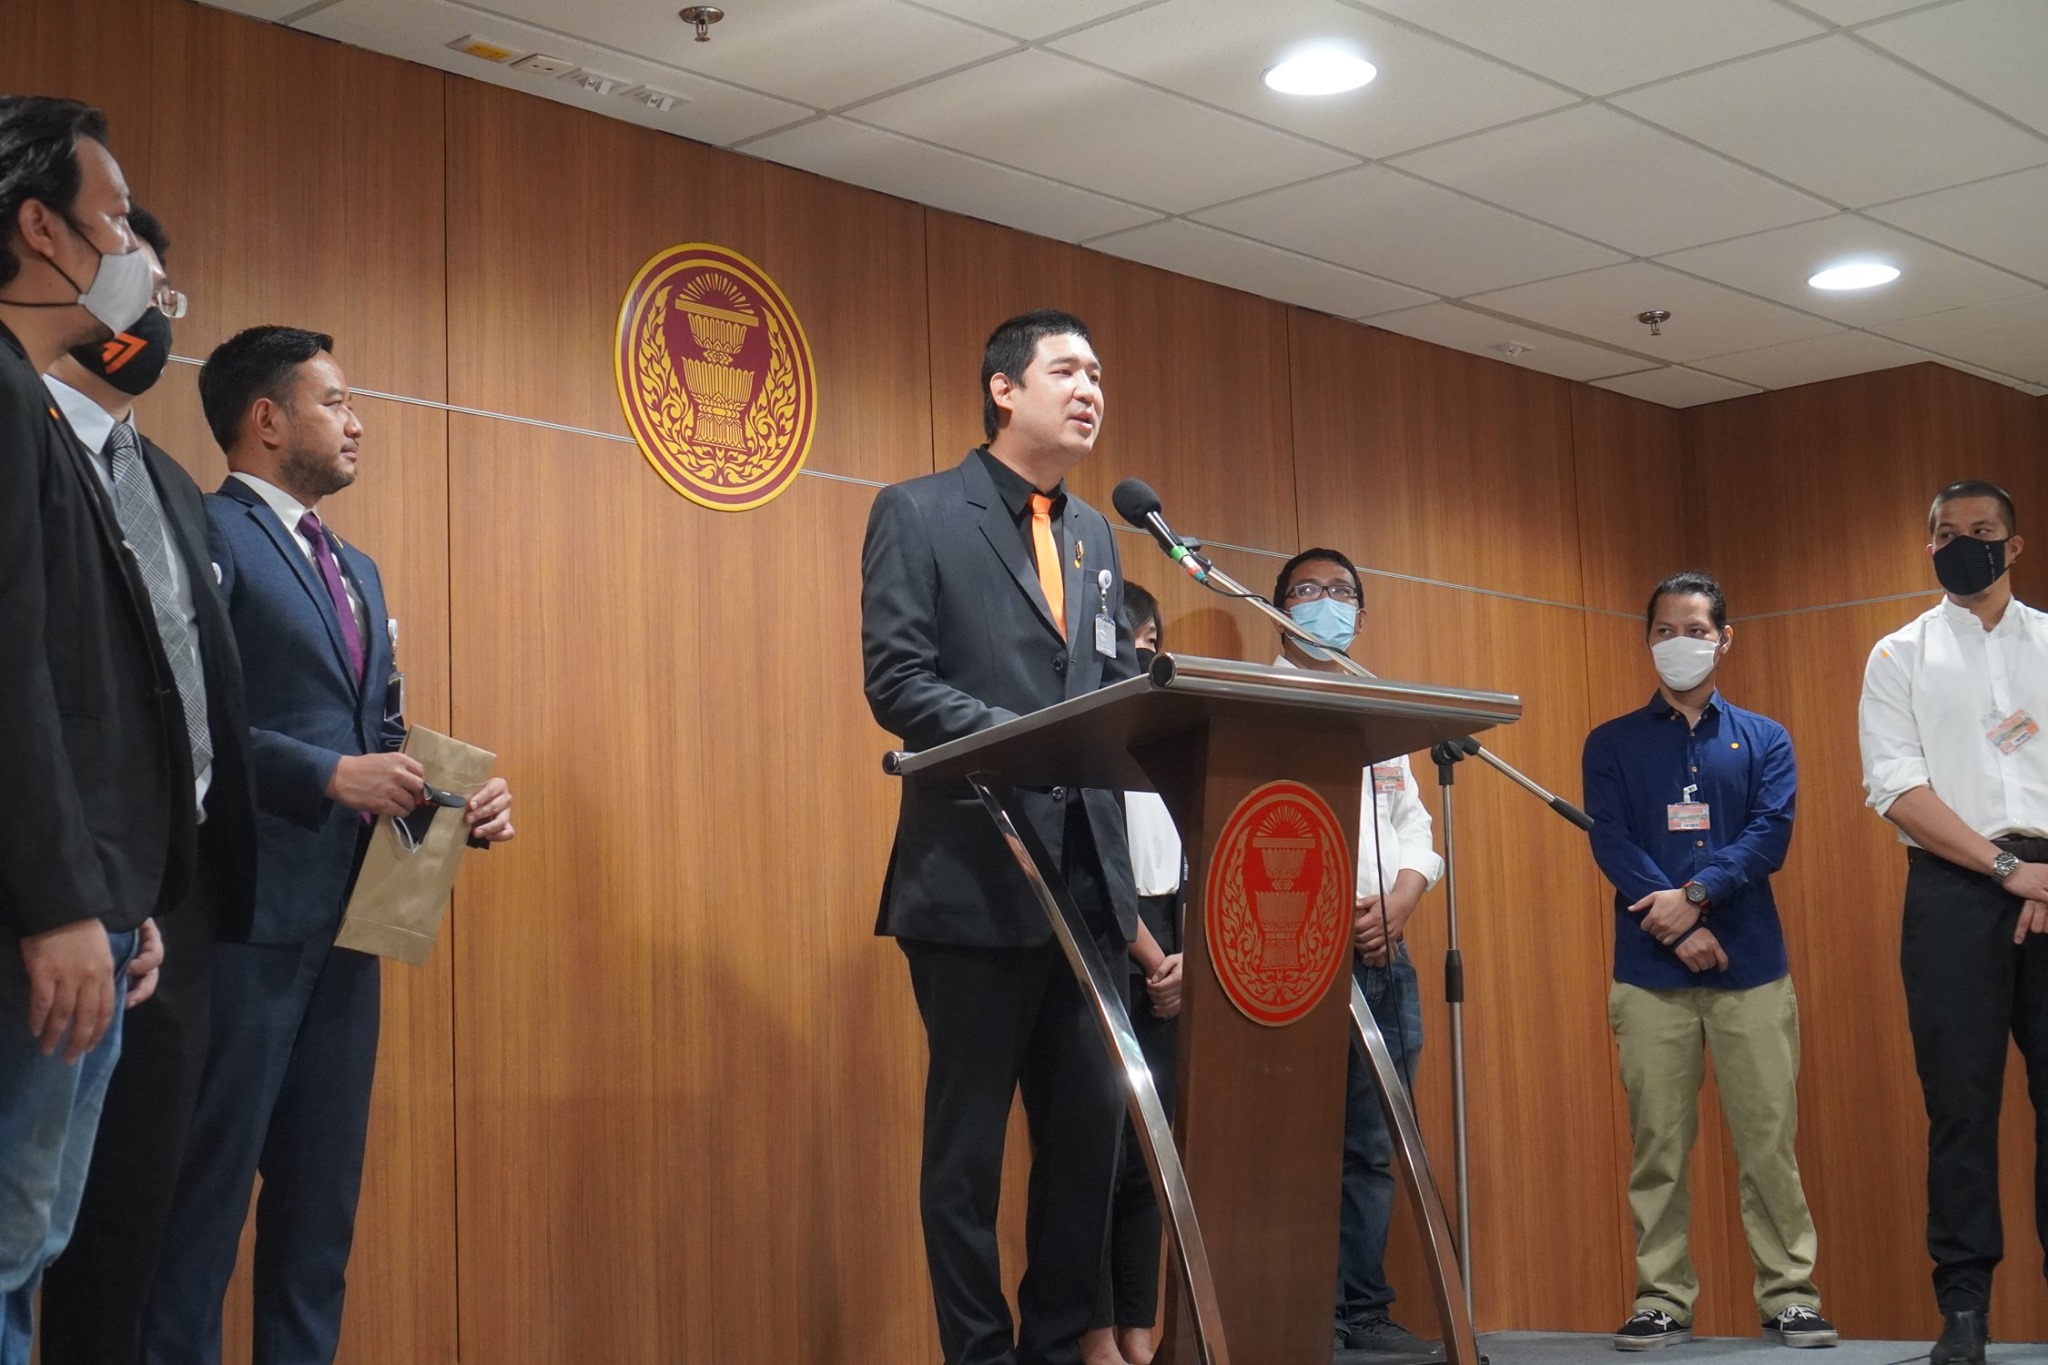 Taopiphop Limjittrakorn, “beer activist” and MP of Move Forward Party, talks at a podium on Thursday asking authorities to revoke the Section 32.